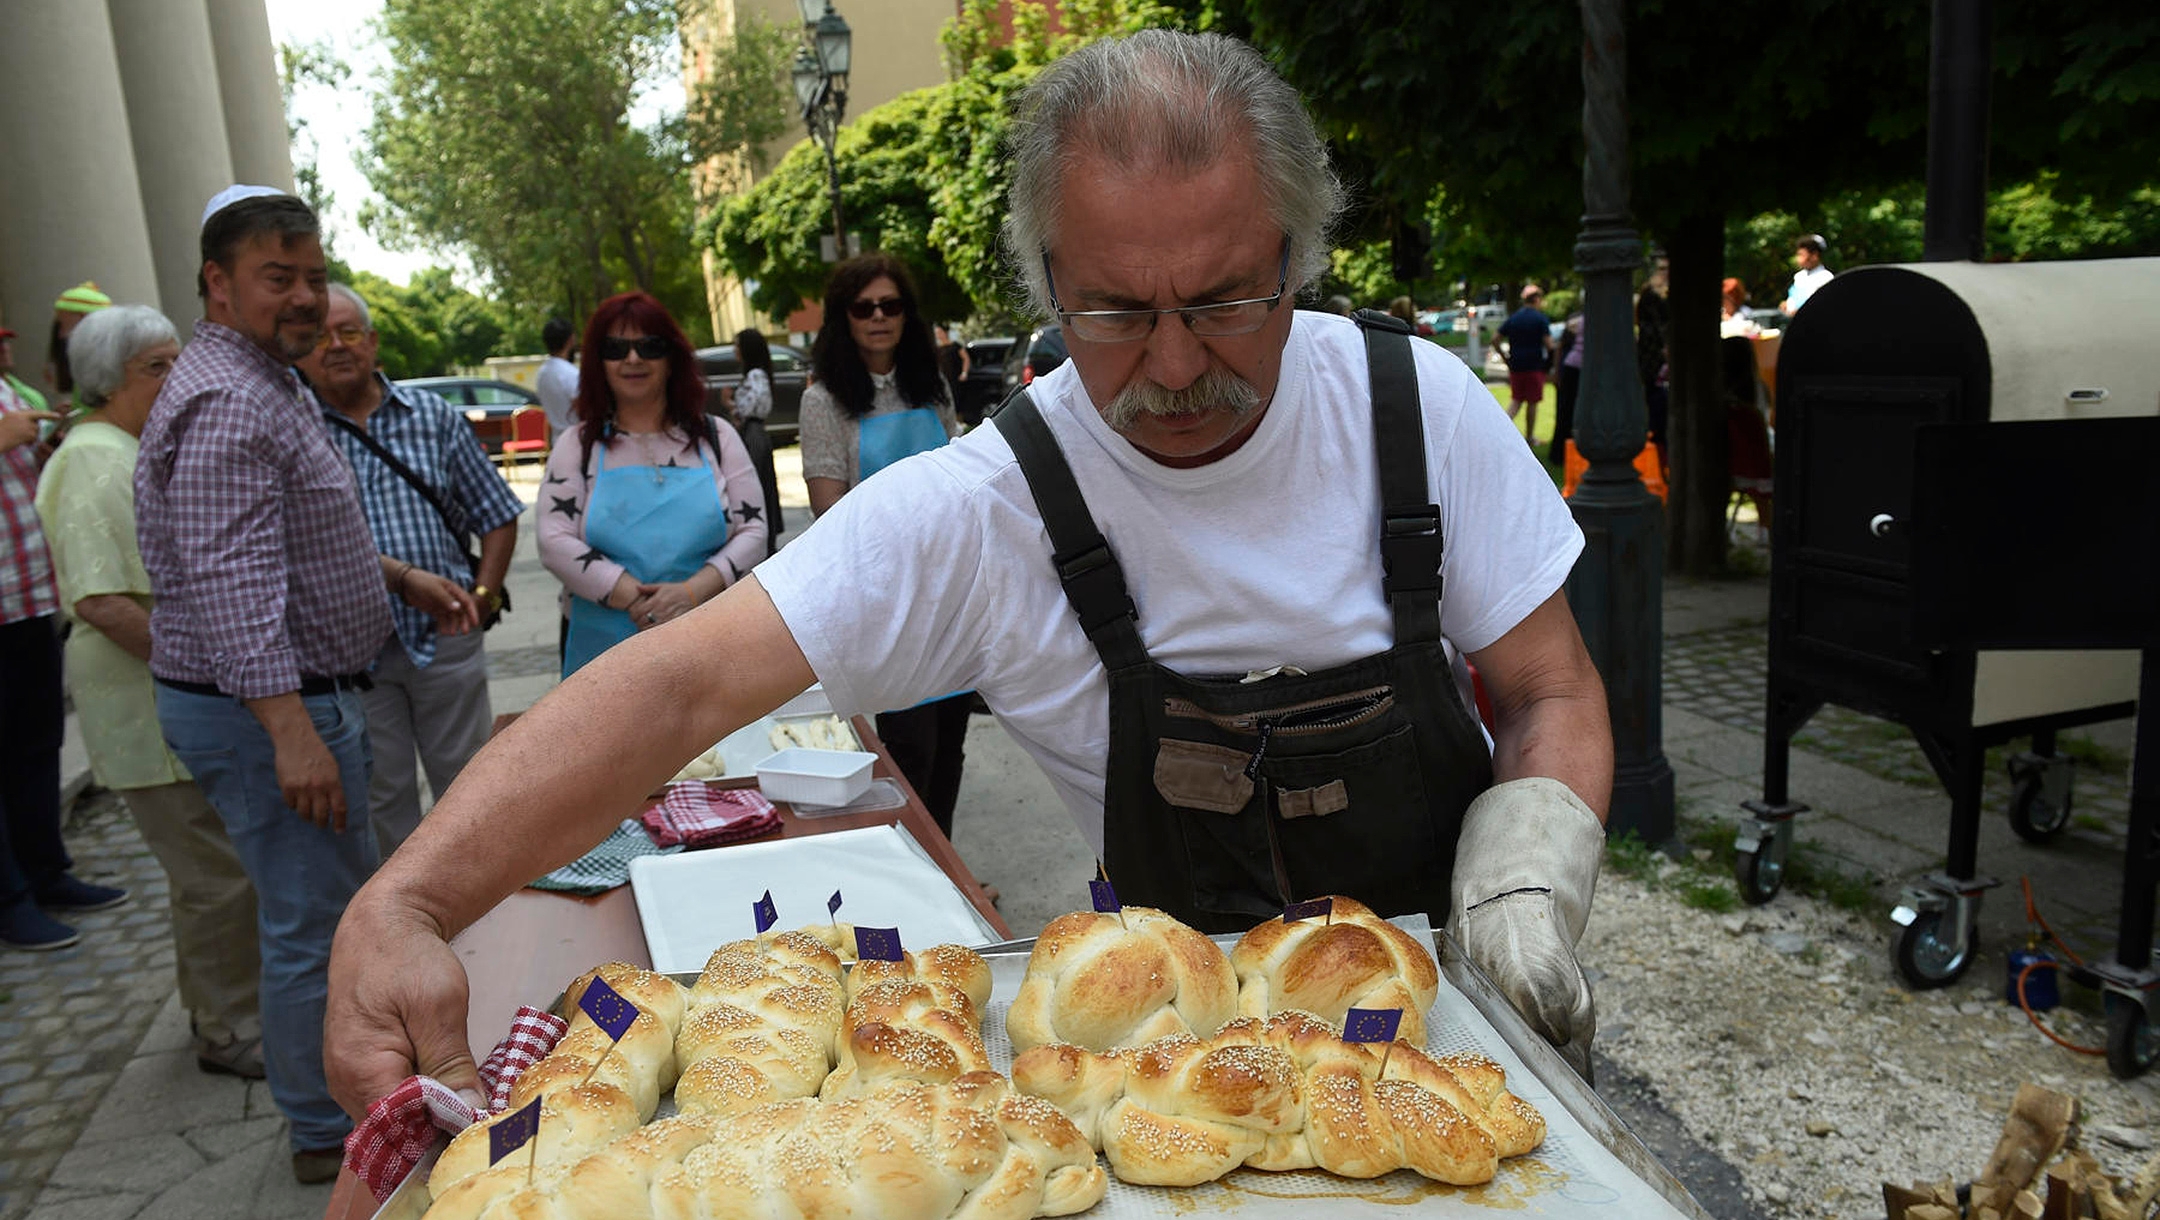 Hungarian Jews baking challah breads in front of the Obuda Synagogue in Budapest, Hungary on Oct. 7, 2019. (Courtesy of EMIH)